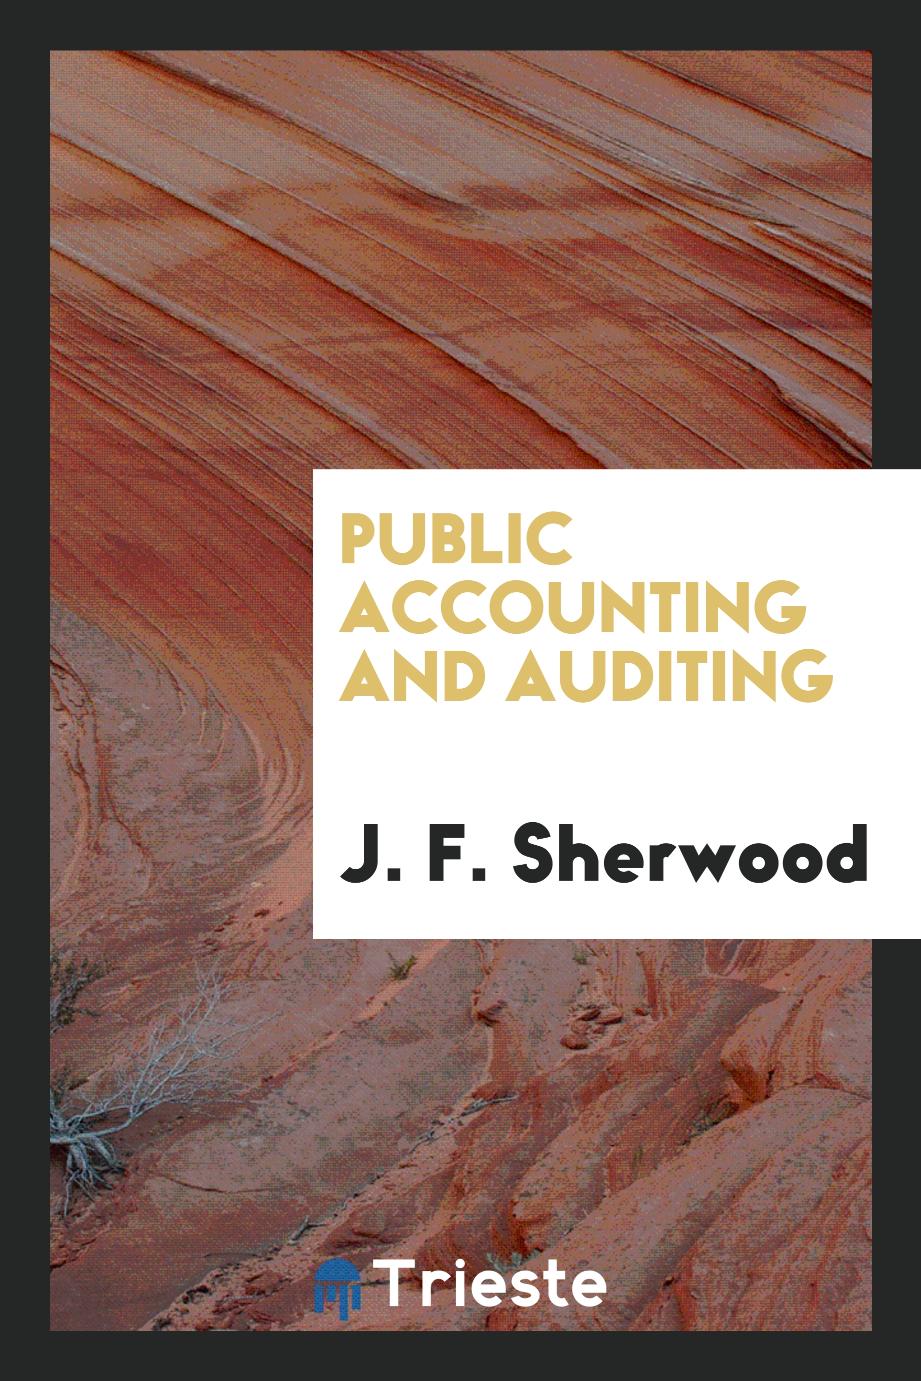 Public accounting and auditing